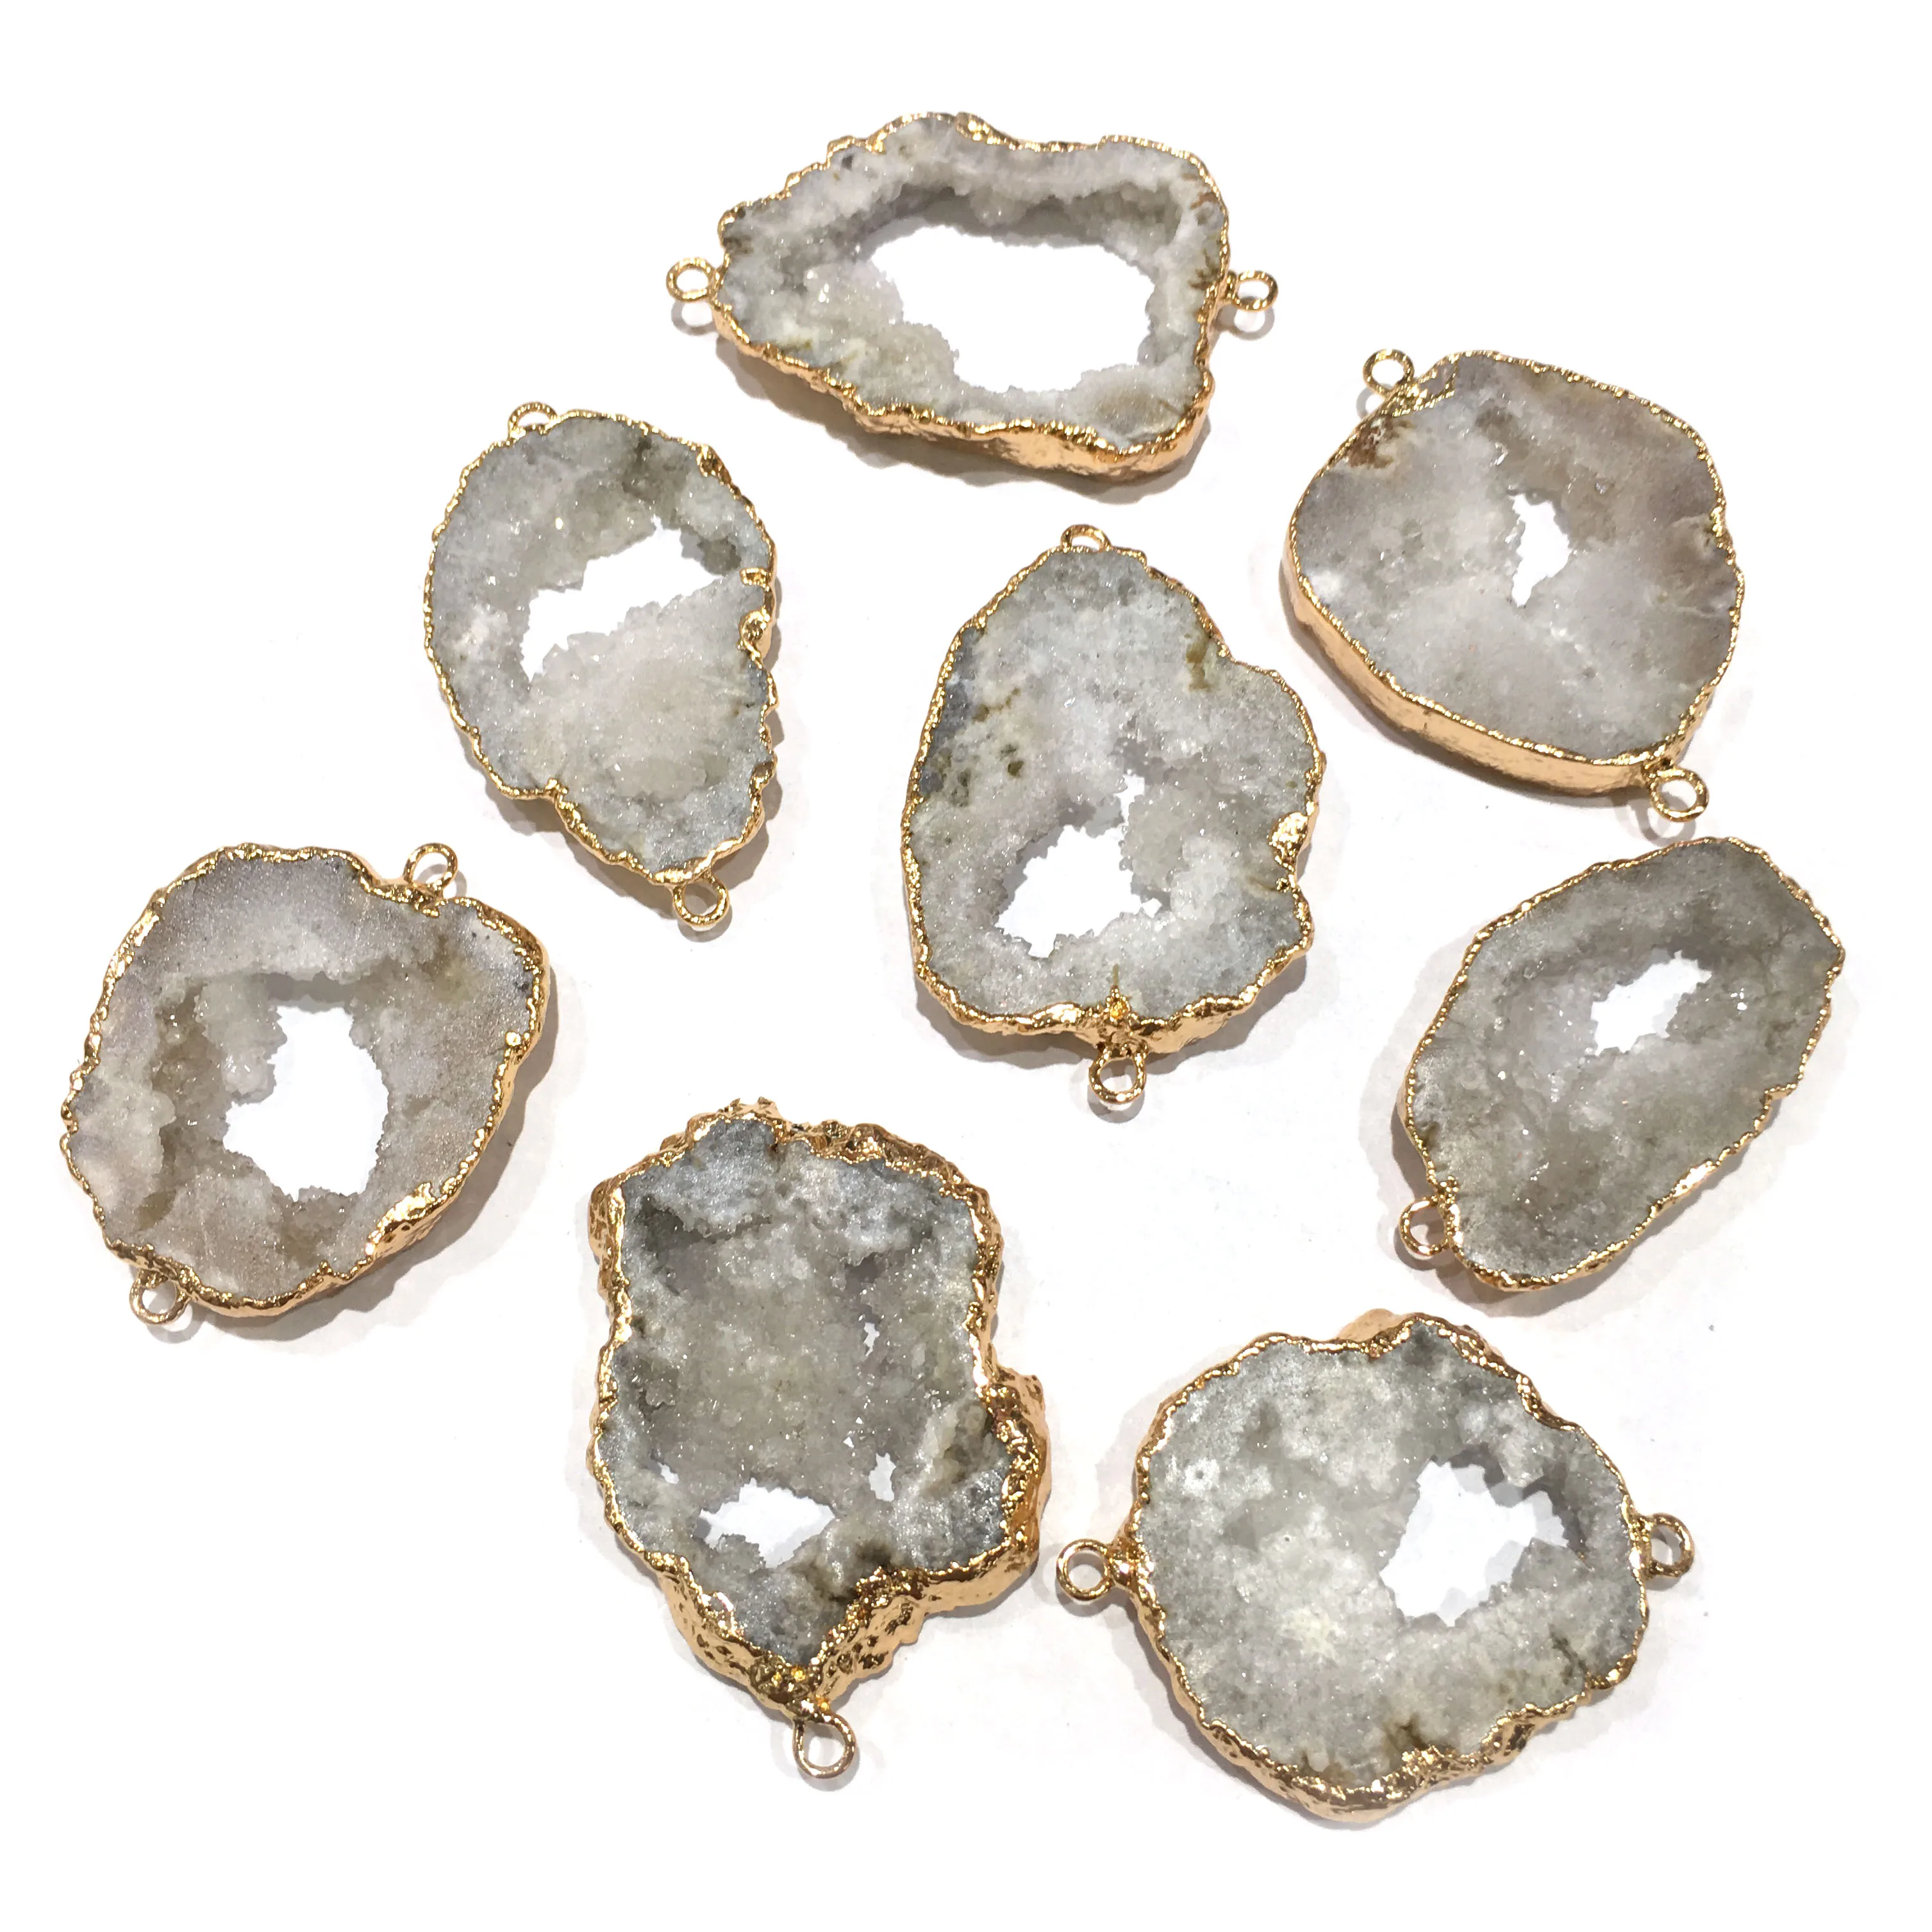 

Natural Irregular Druzy Crystal Geode Agates Stone Pendant Links Healing Chakra Gemstone Charms for Jewelry Making